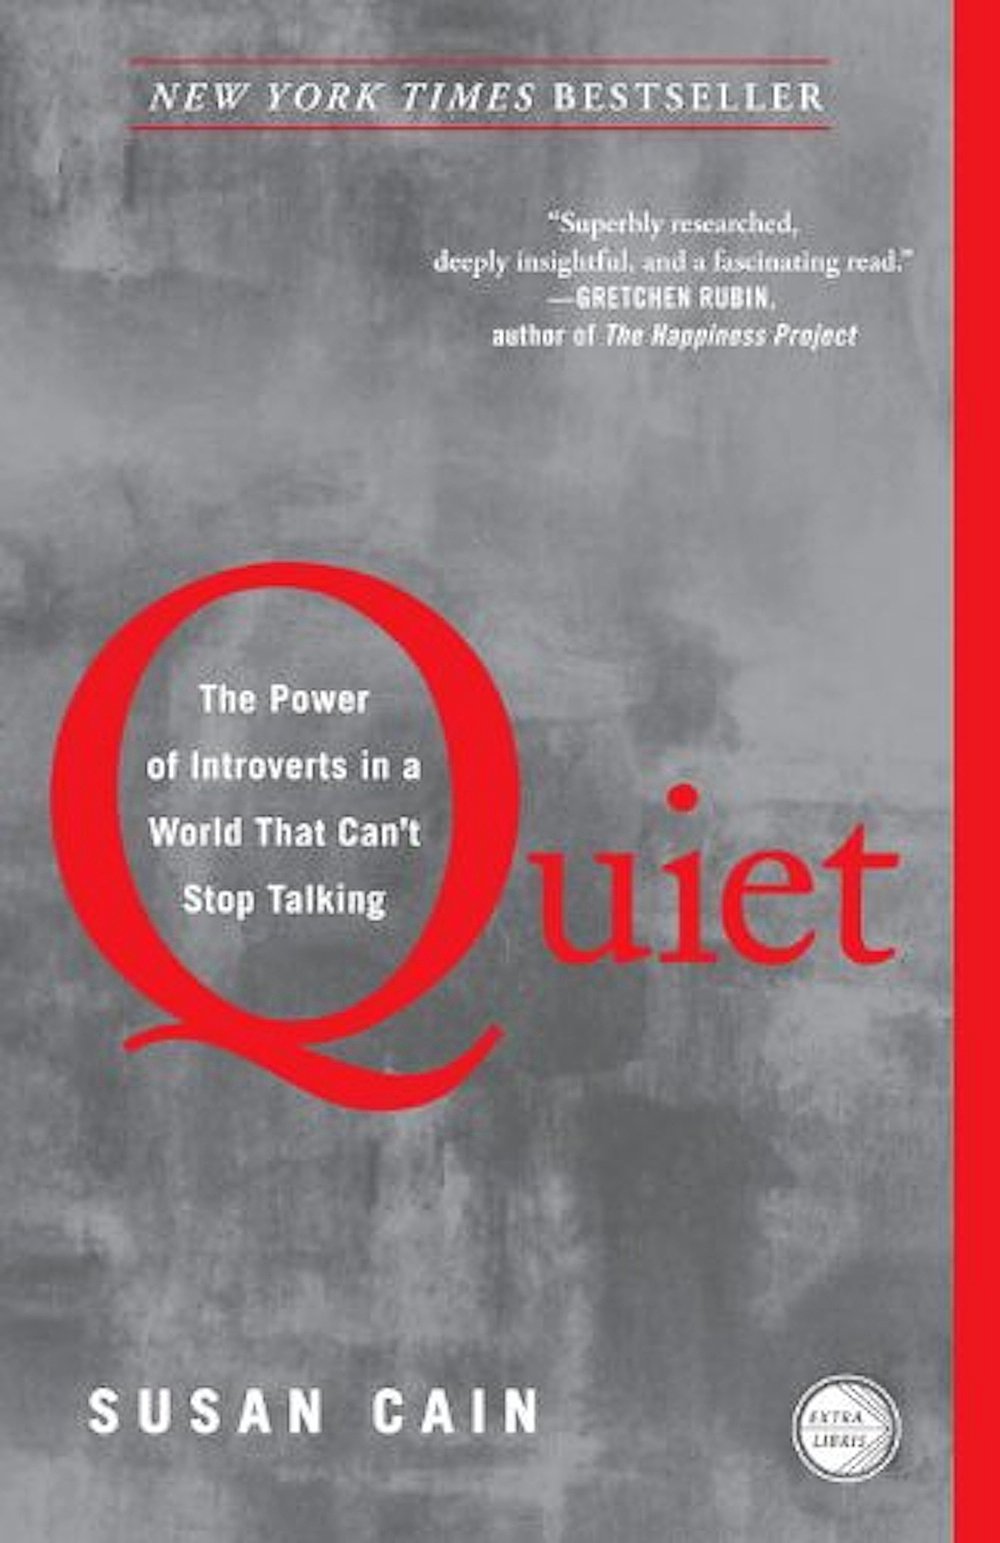 quiet-by-susan-cain